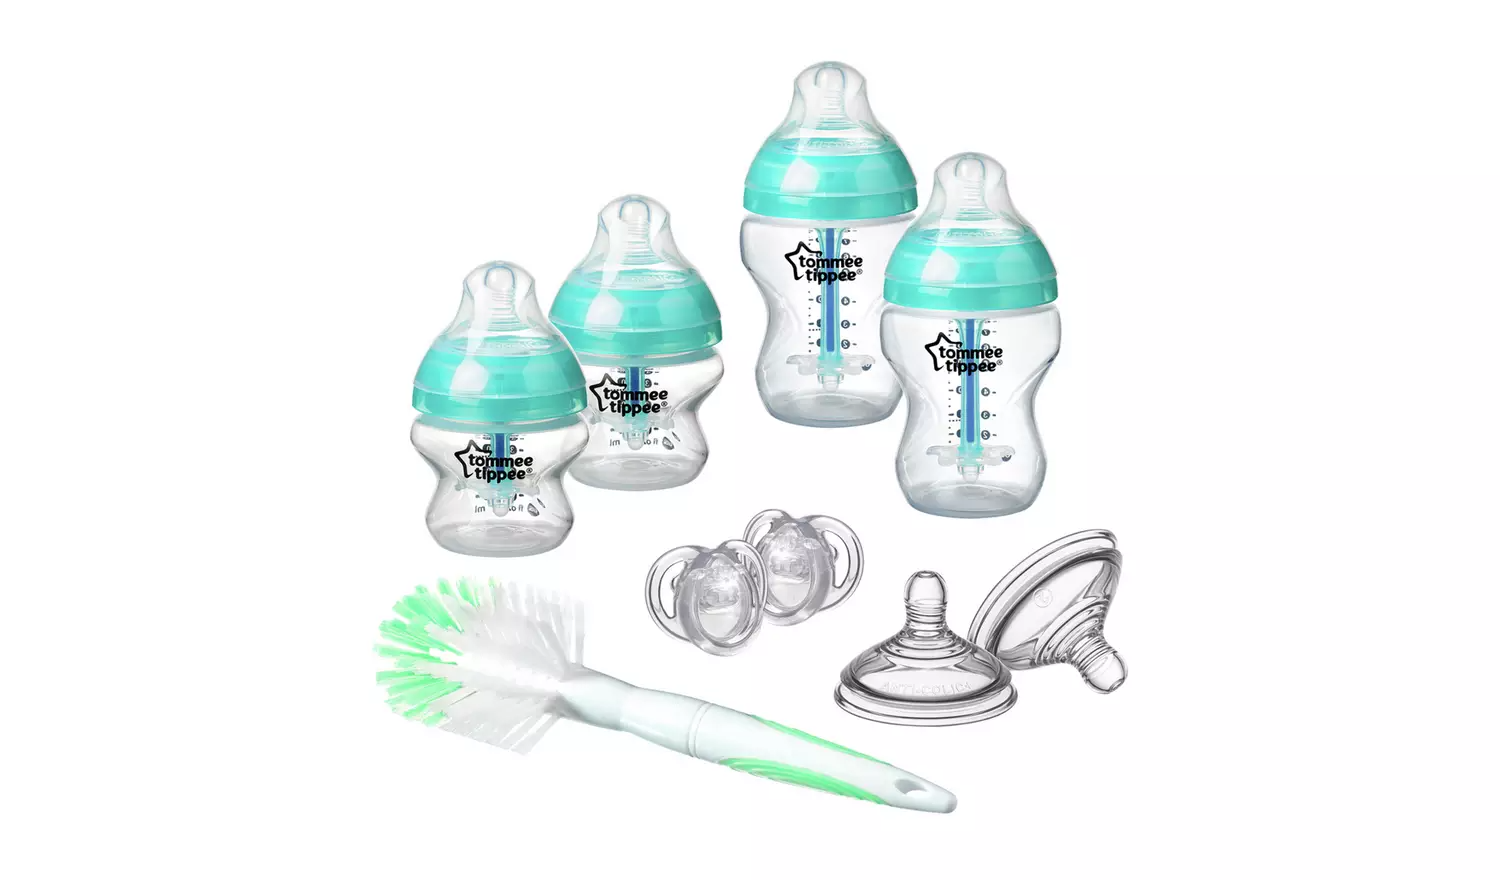 Tommee Tippee Advanced Anti-Colic Starter Kit